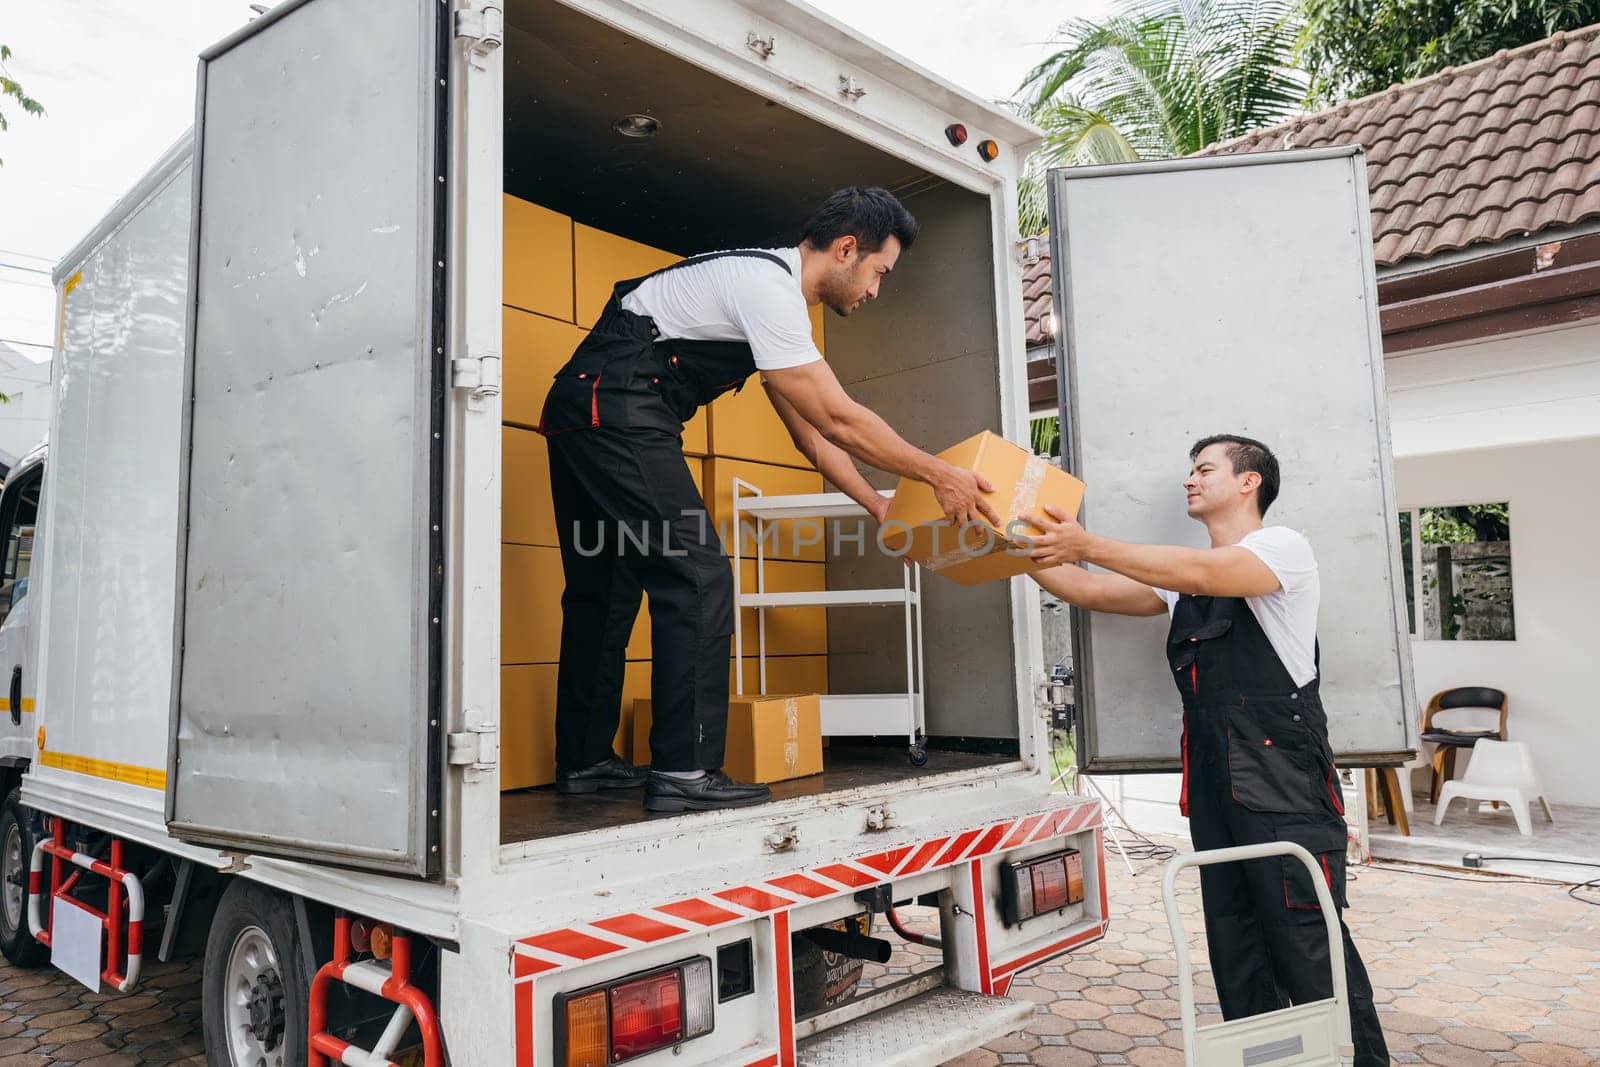 Employee team unloads boxes from truck for customer moving house showcasing the company dedication to efficient service and customer happiness. Moving Day